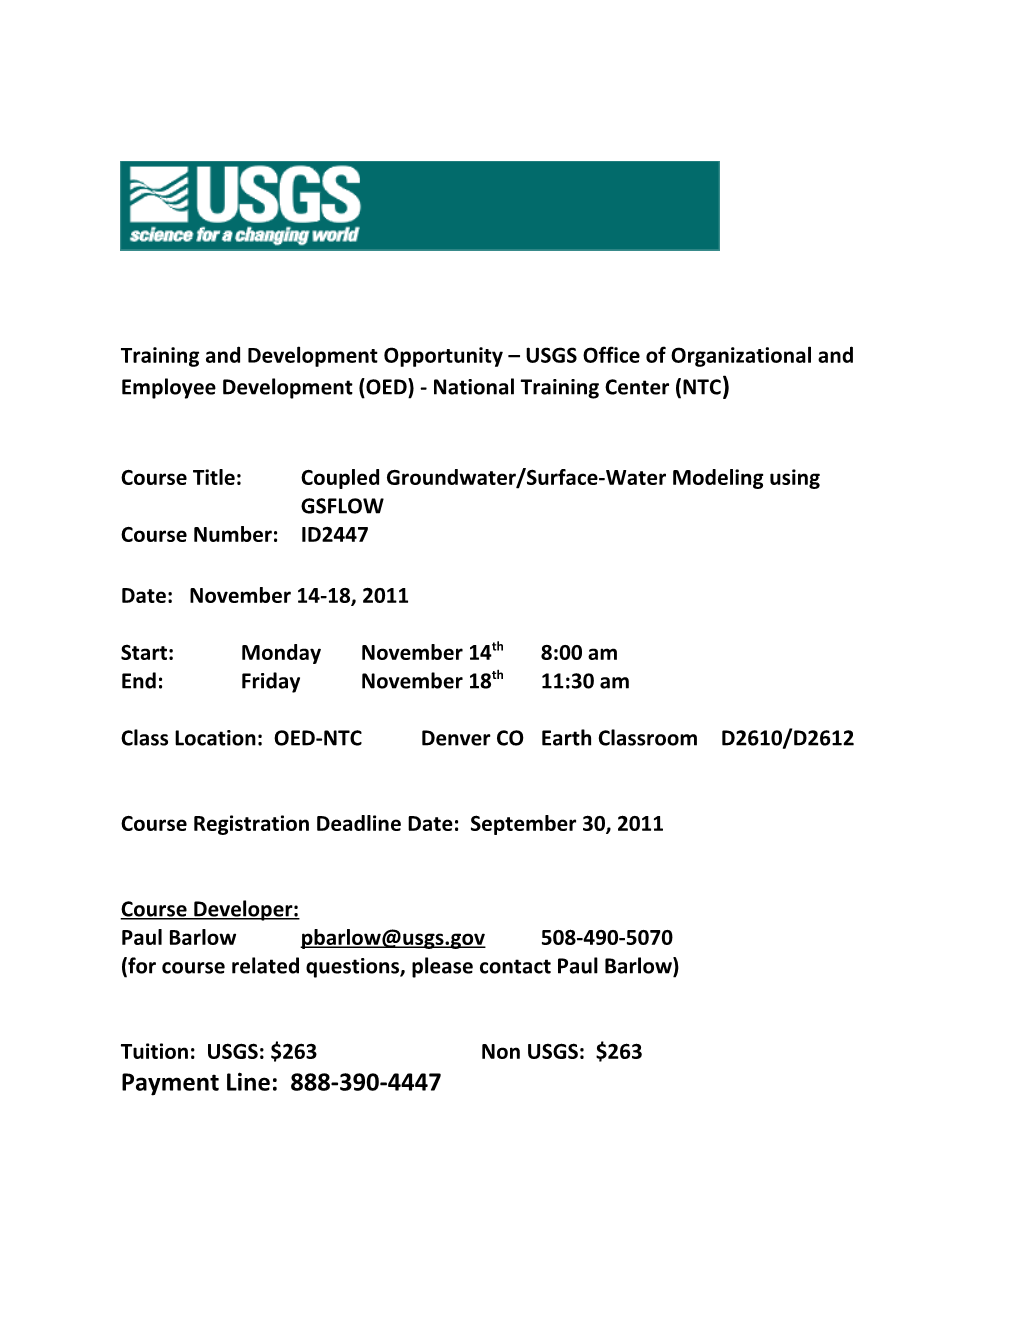 Course Title: Coupled Groundwater/Surface-Water Modeling Using GSFLOW